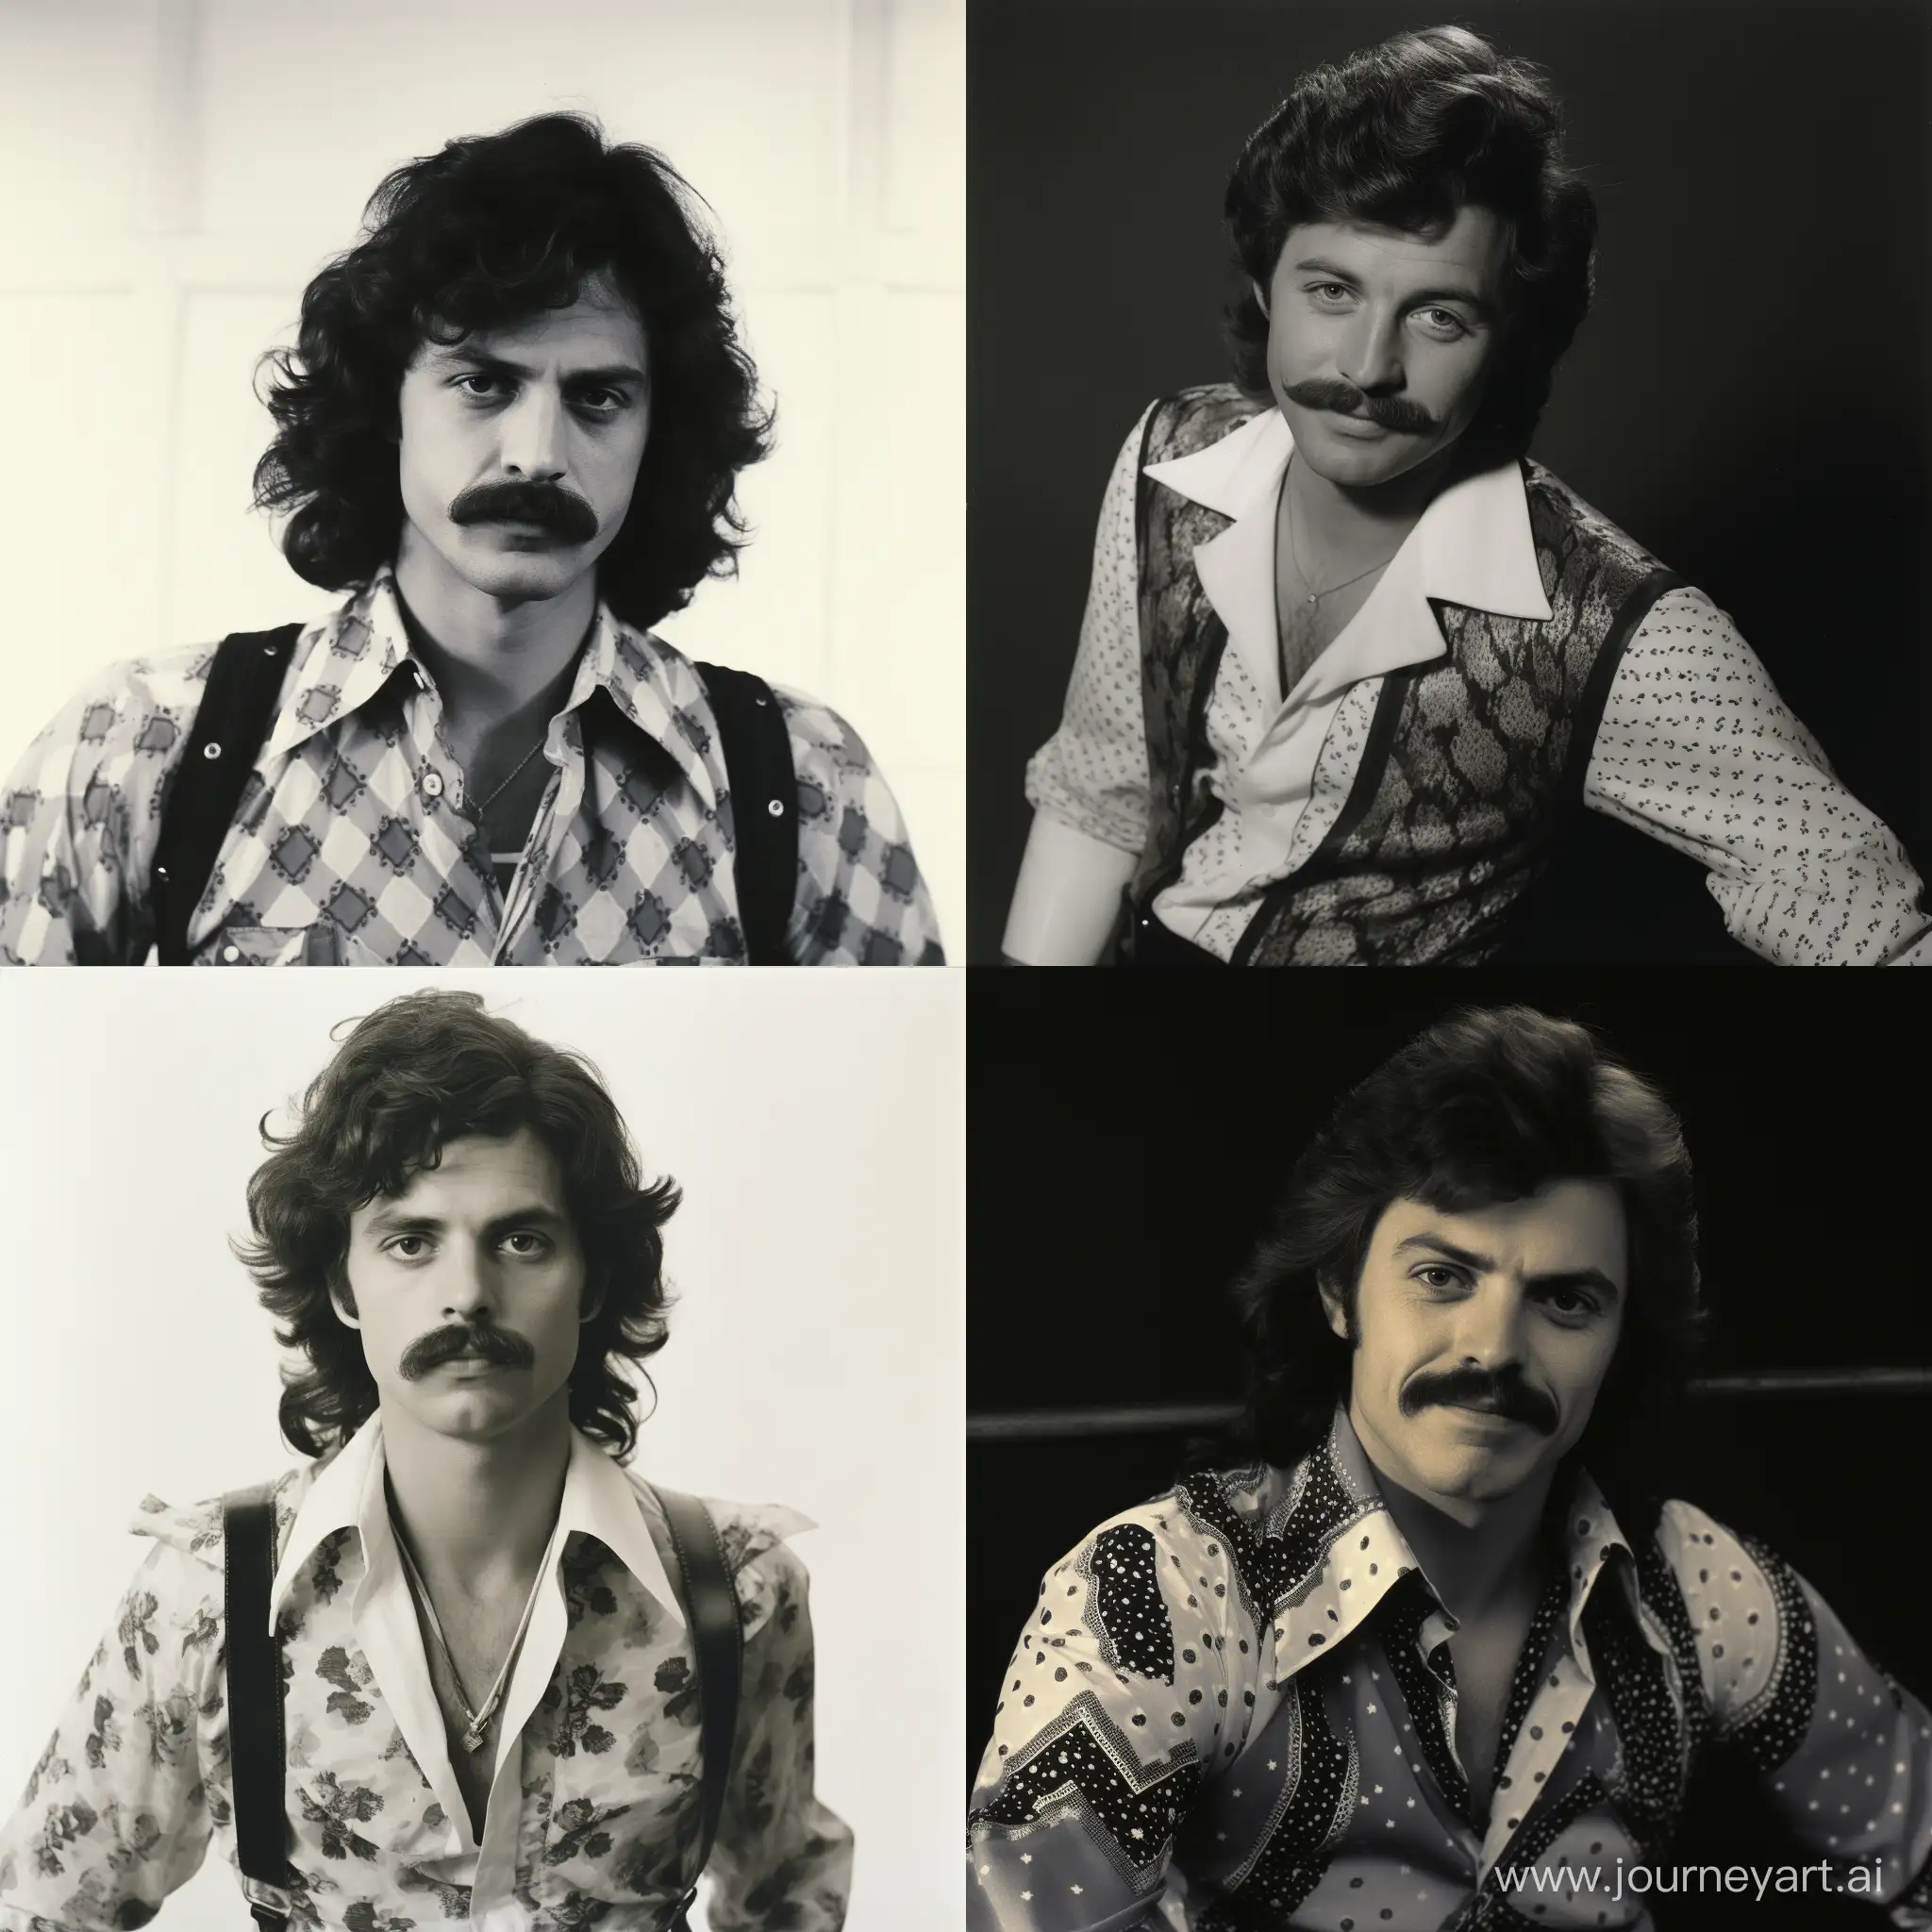 Vintage-1970s-Fashion-Portrait-with-Suspenders-and-Distinctive-Patterned-Shirt